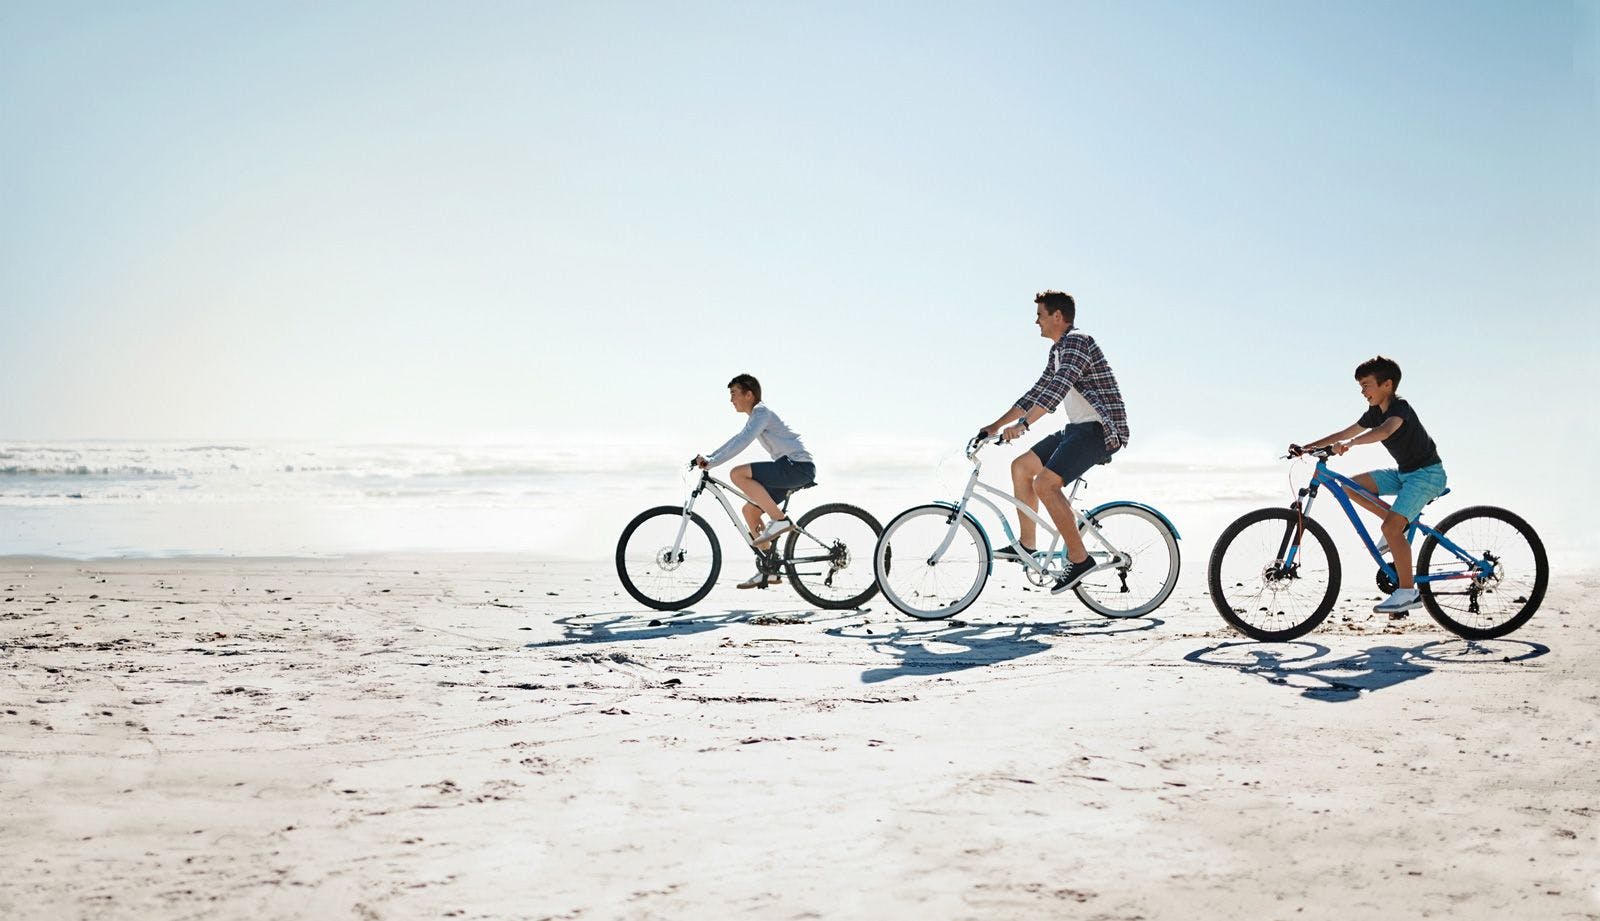 A man and two children riding bicycles along a beach